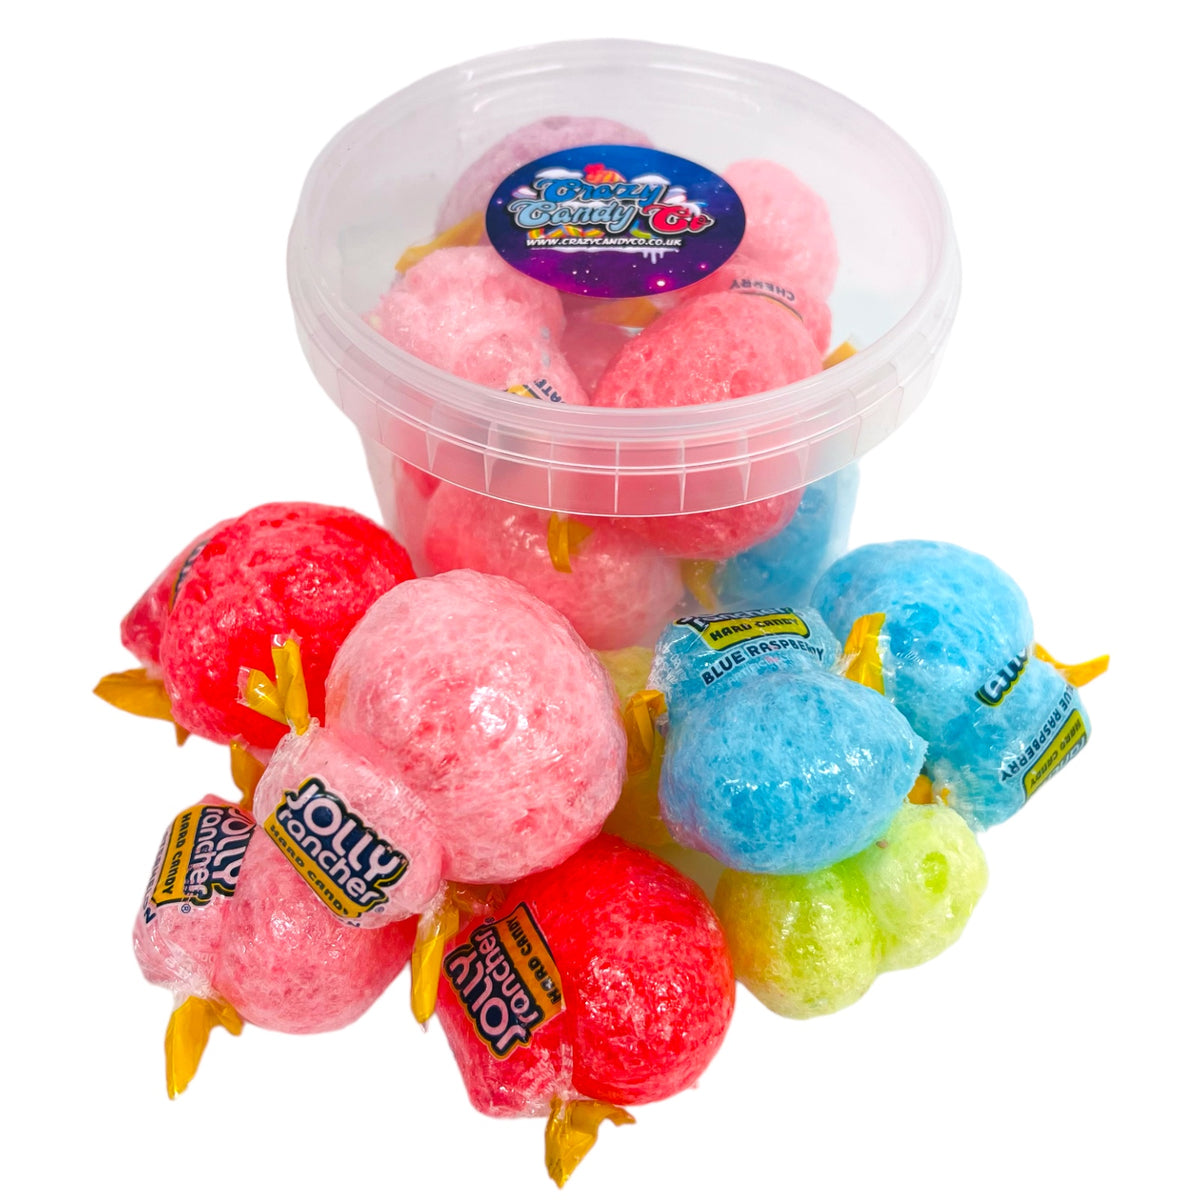 UK Freeze Dried Blue Paint Balls Crunchy, Airy and Flavourful